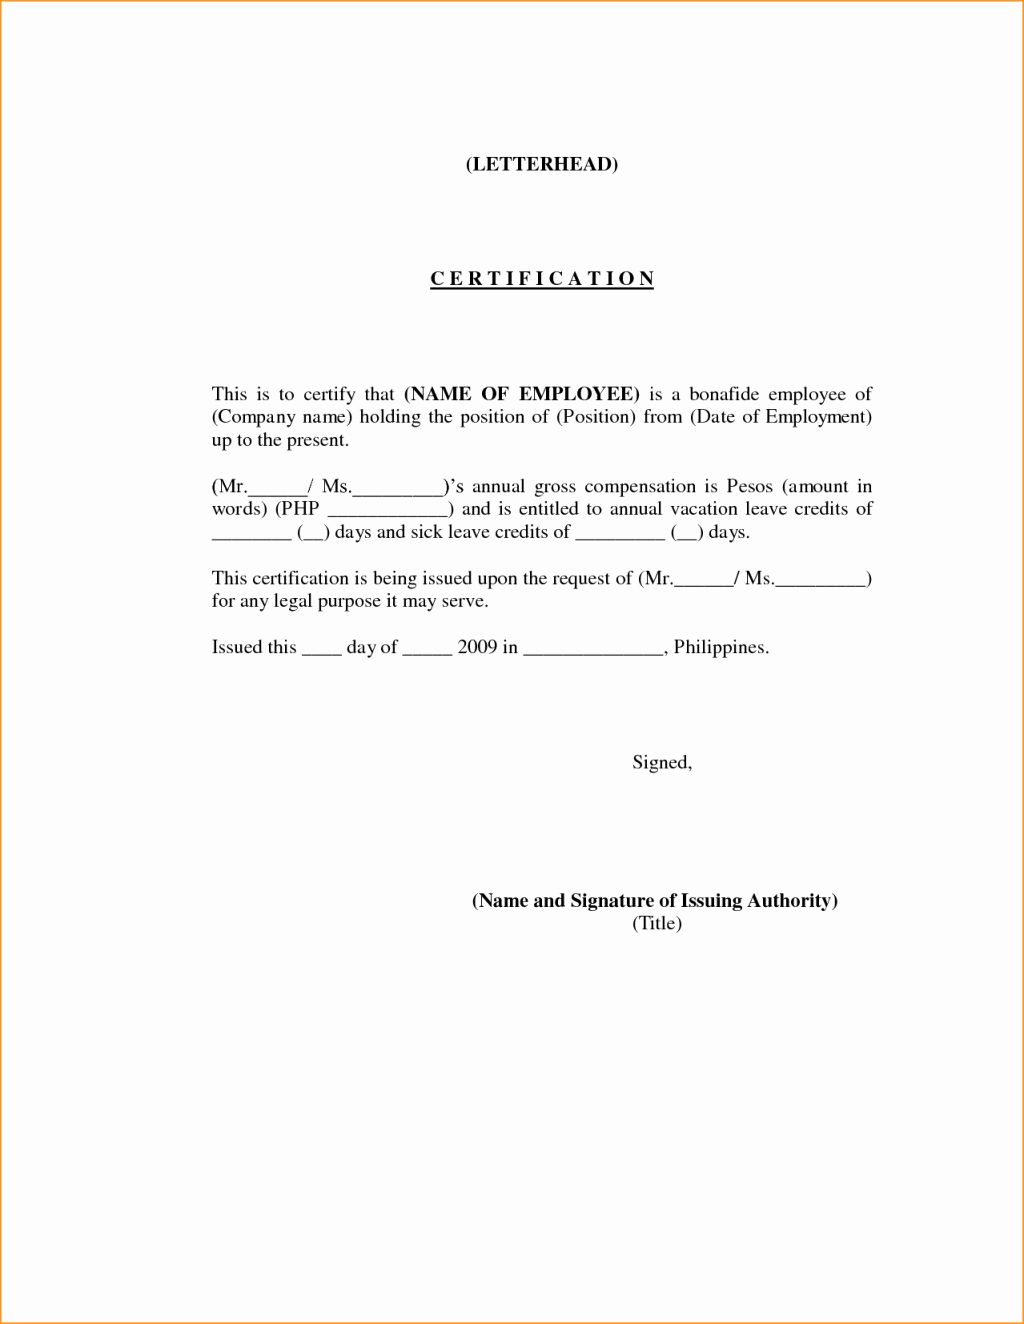 Certificate Of Employment Template Inspirational formal Sample Of Employee Certification Template with Text